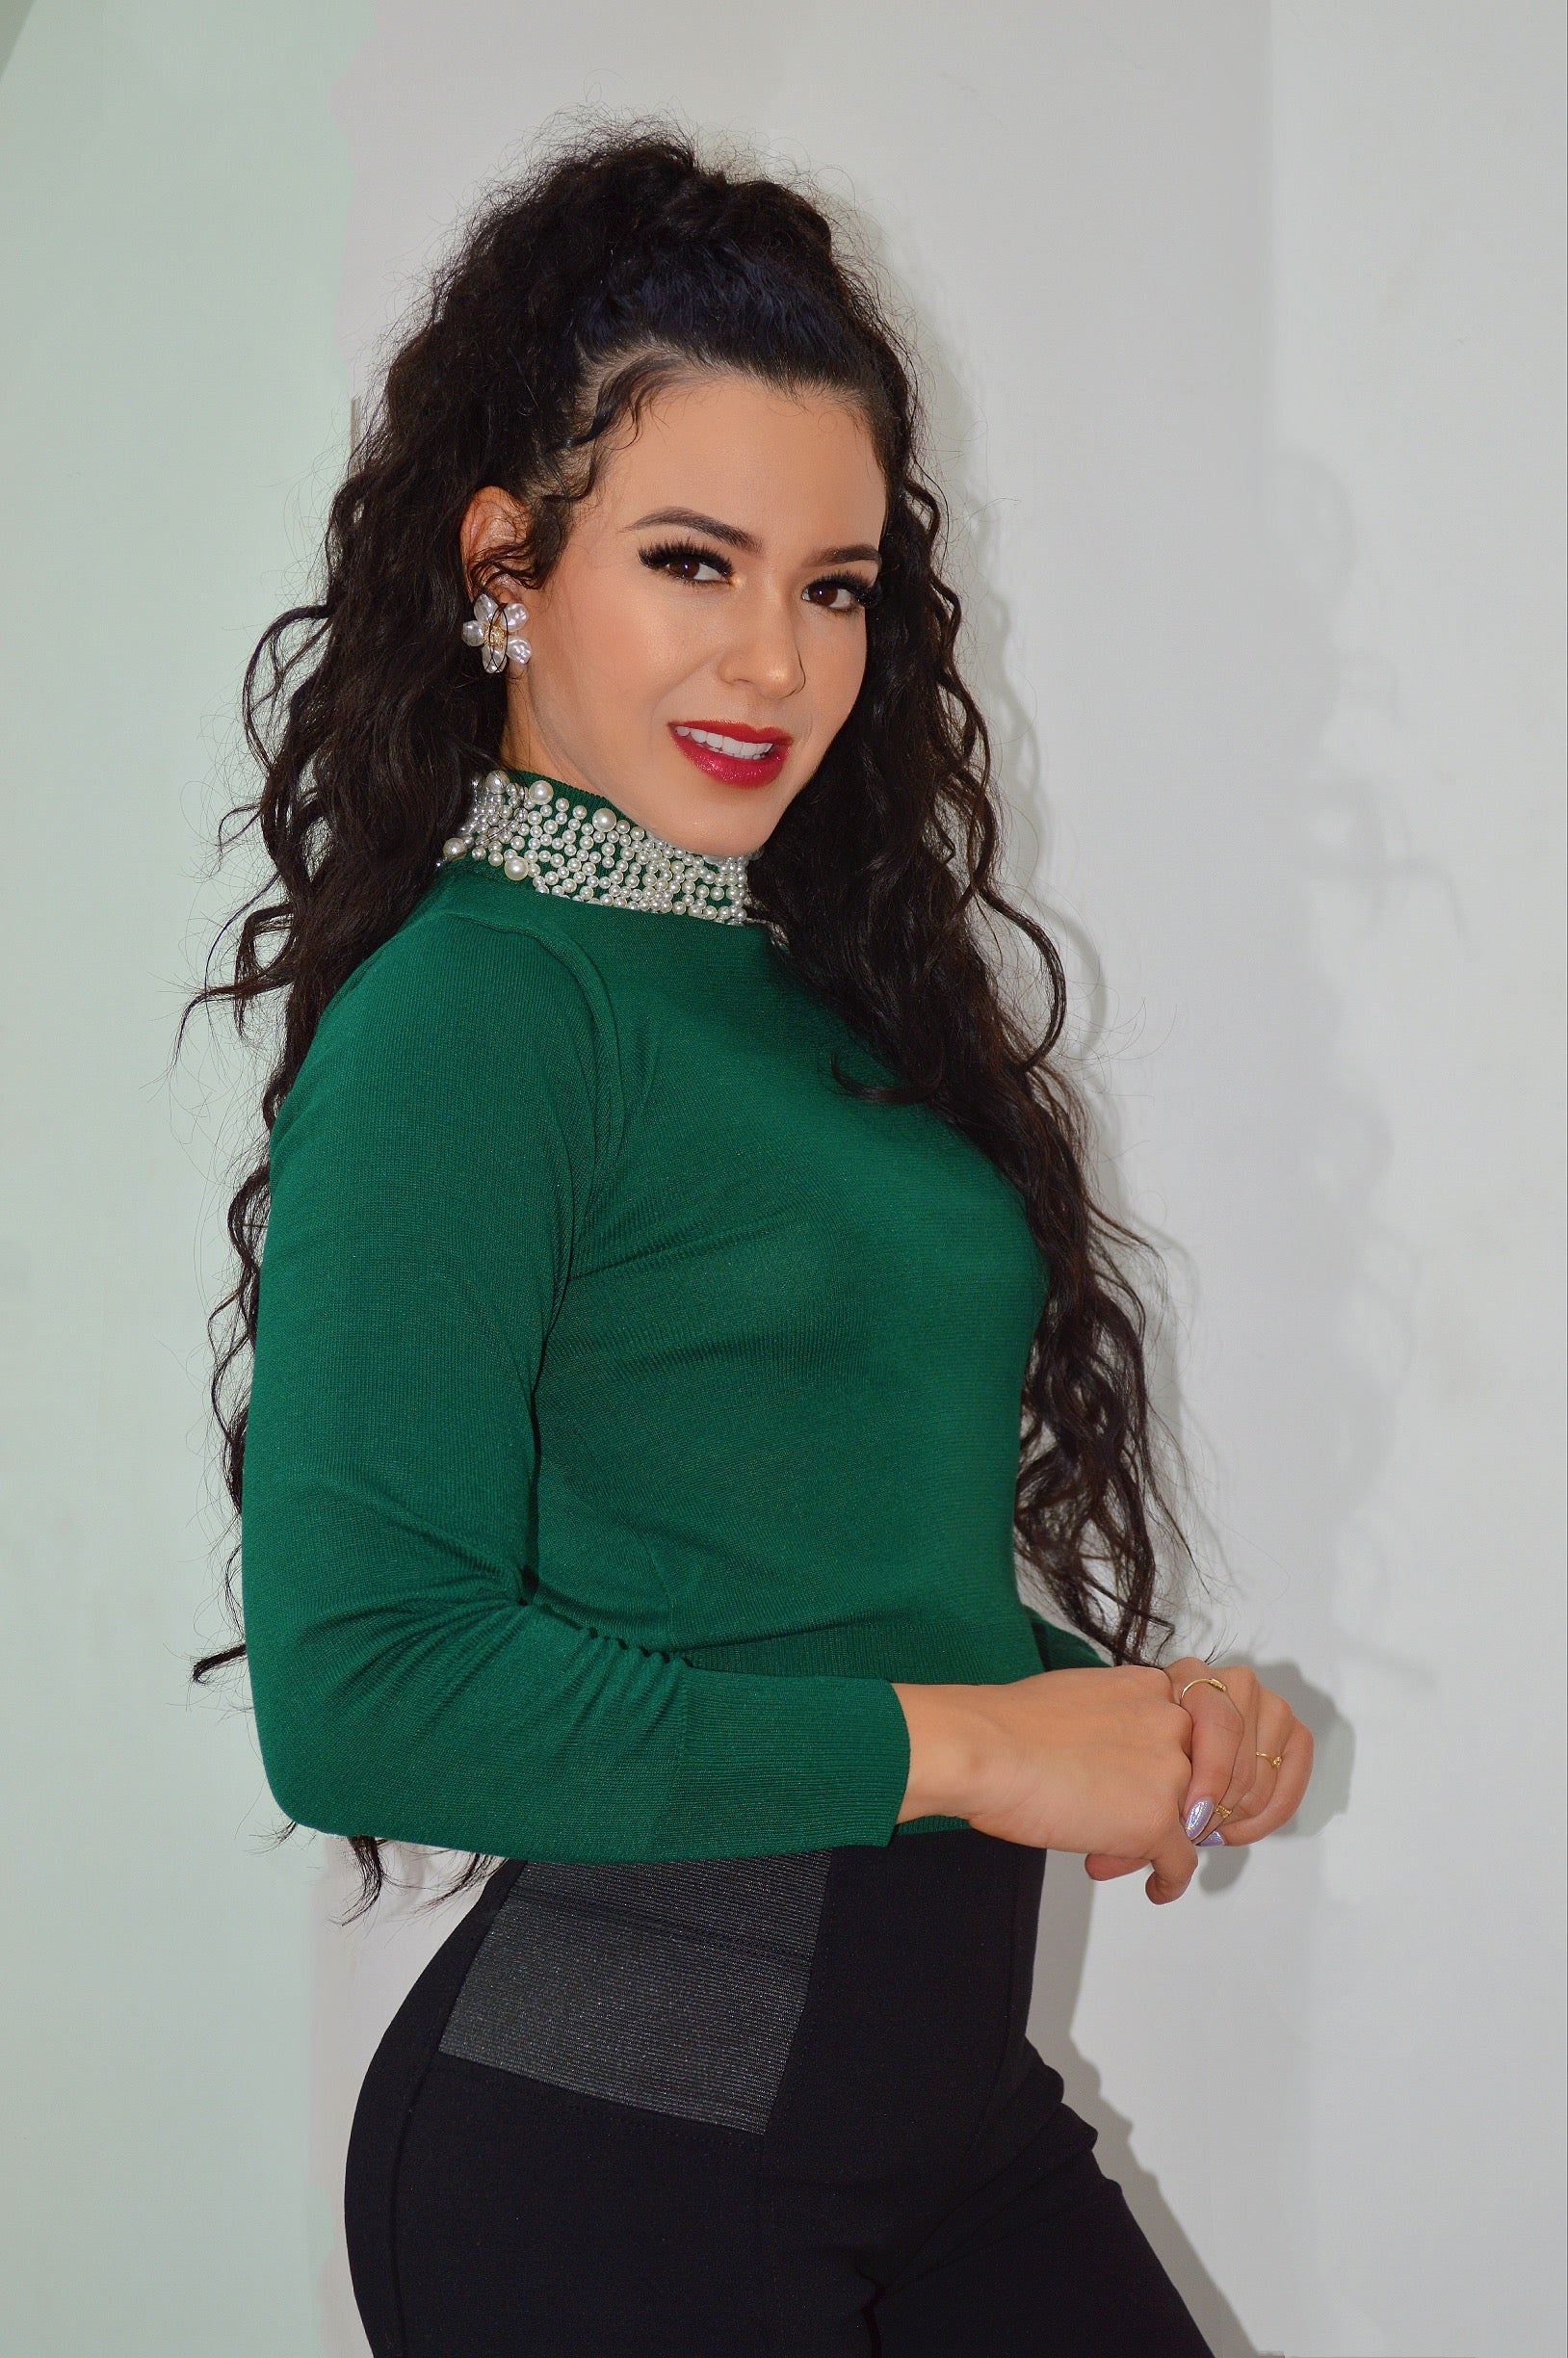 For the Love Of Pearls Emerald Green Sweater